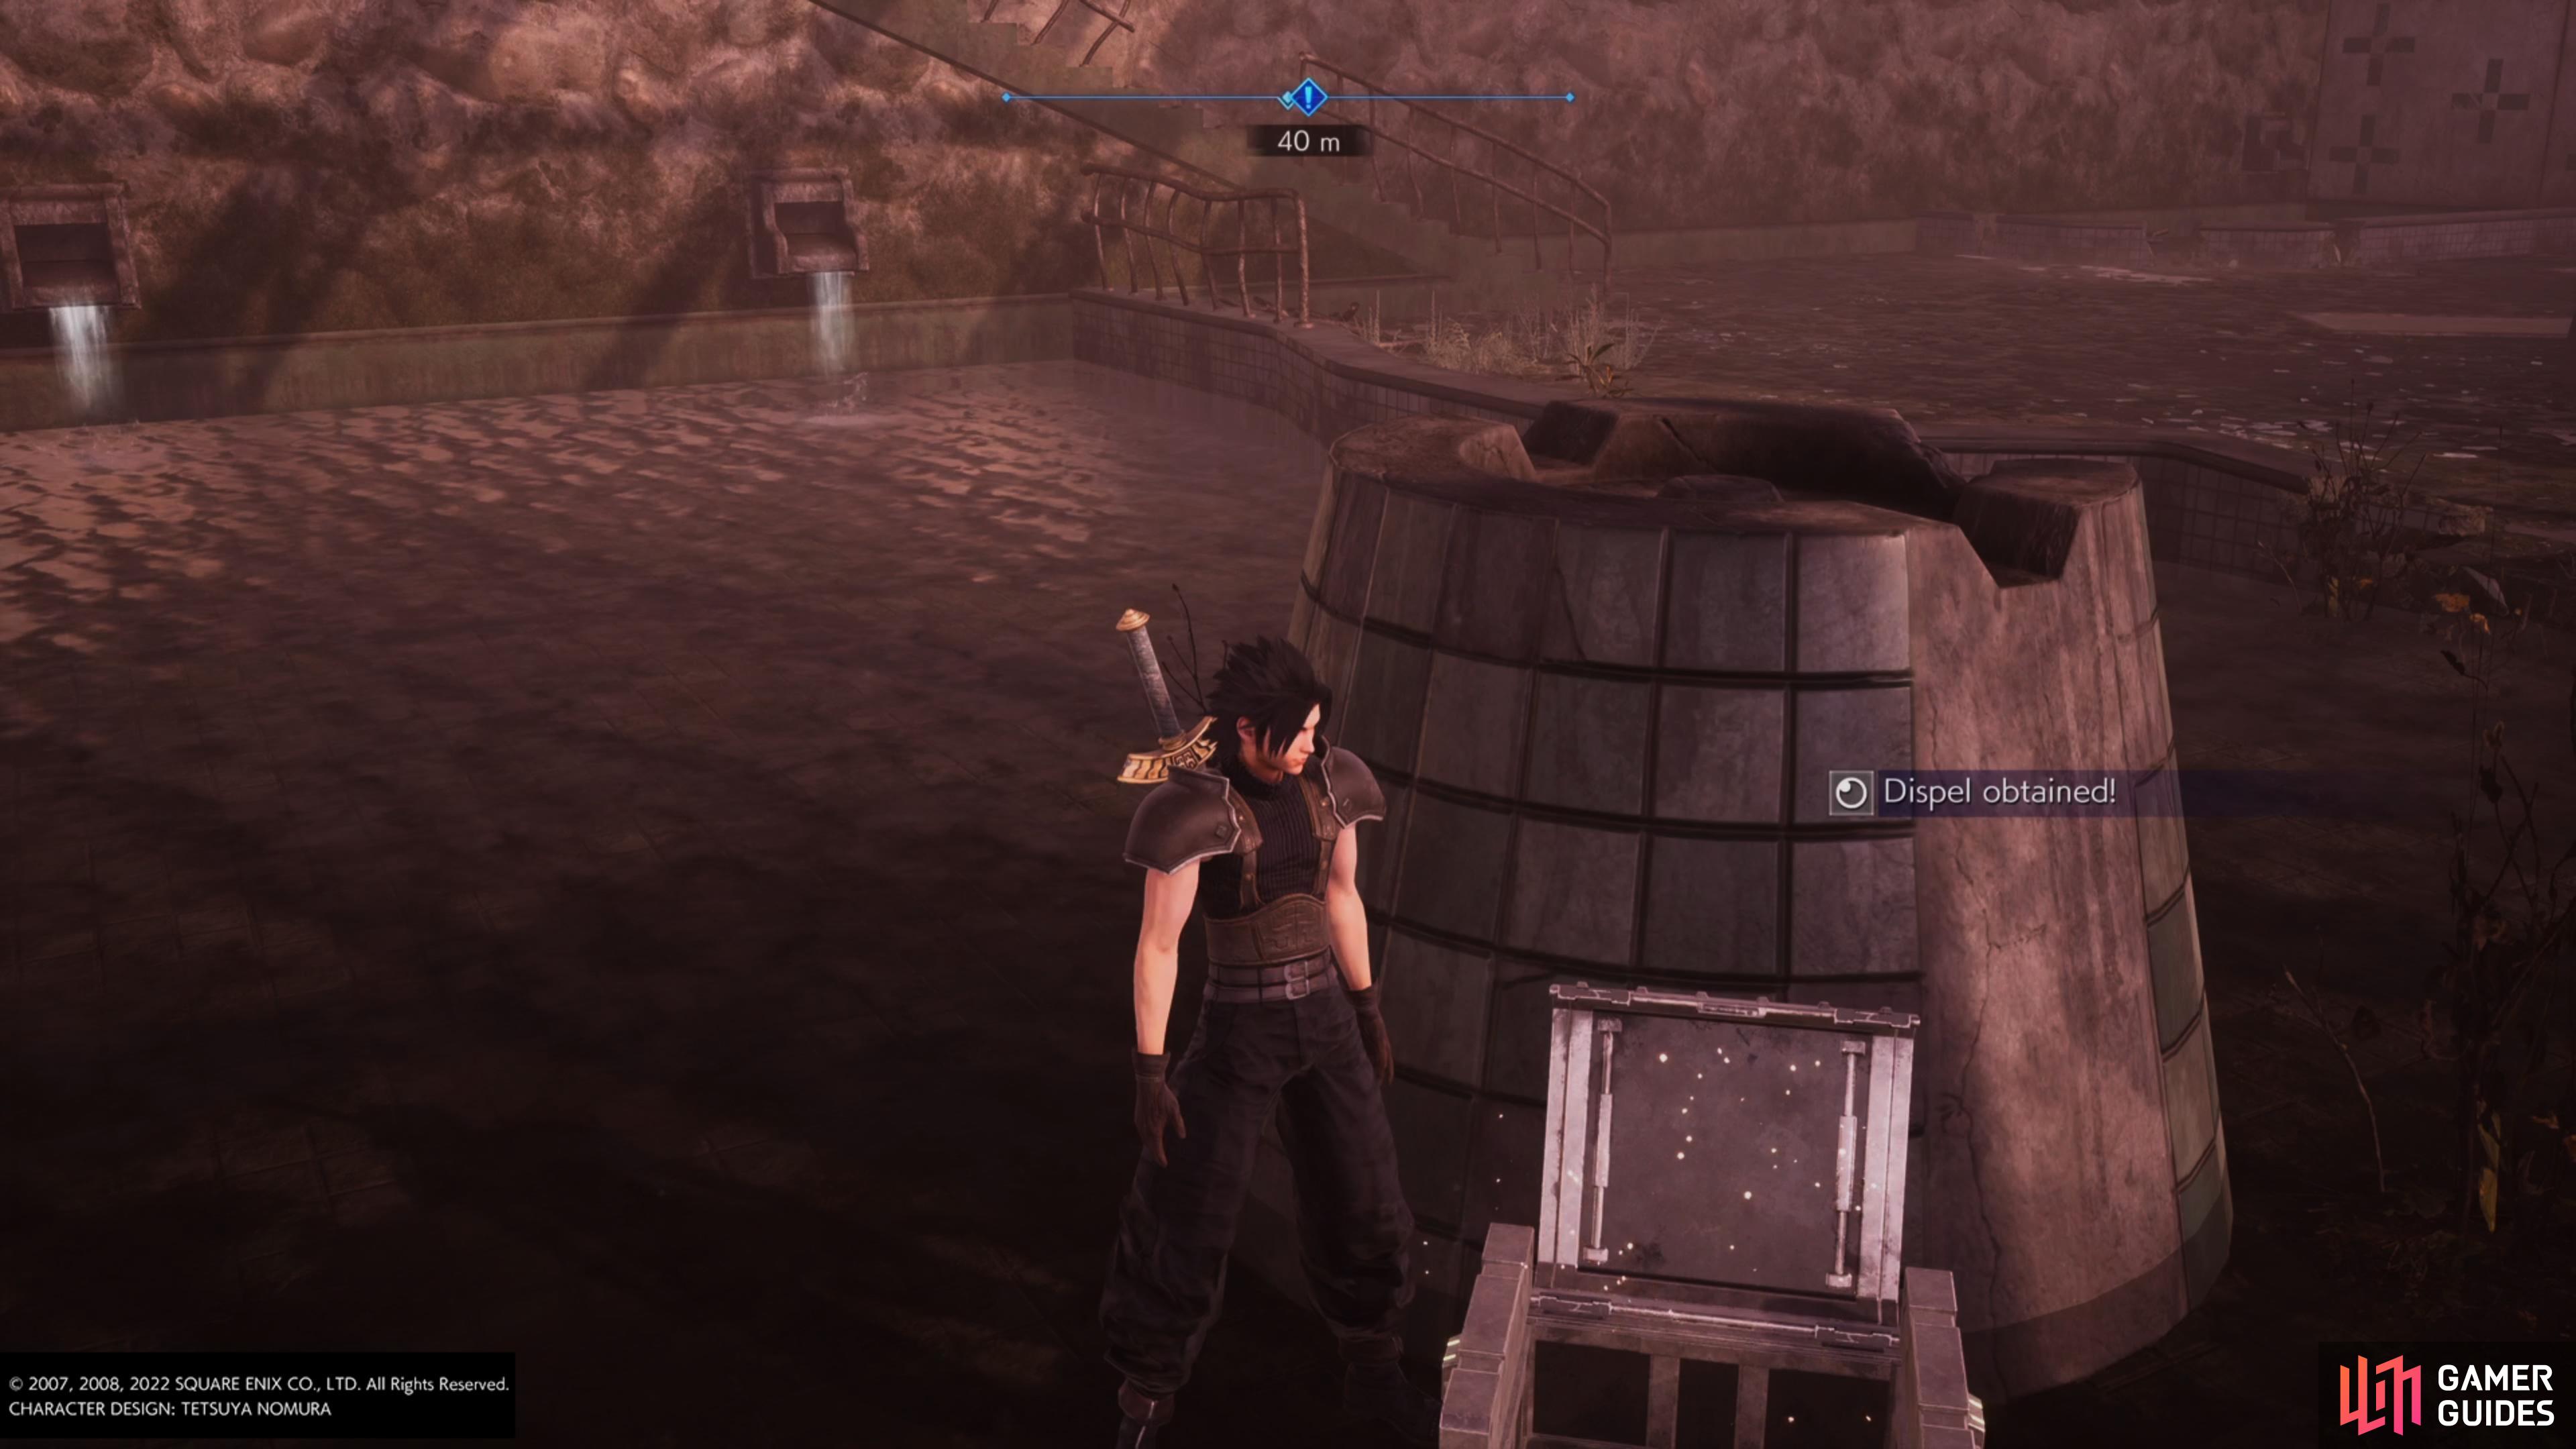 then return to the water to claim the !Dispel Materia.